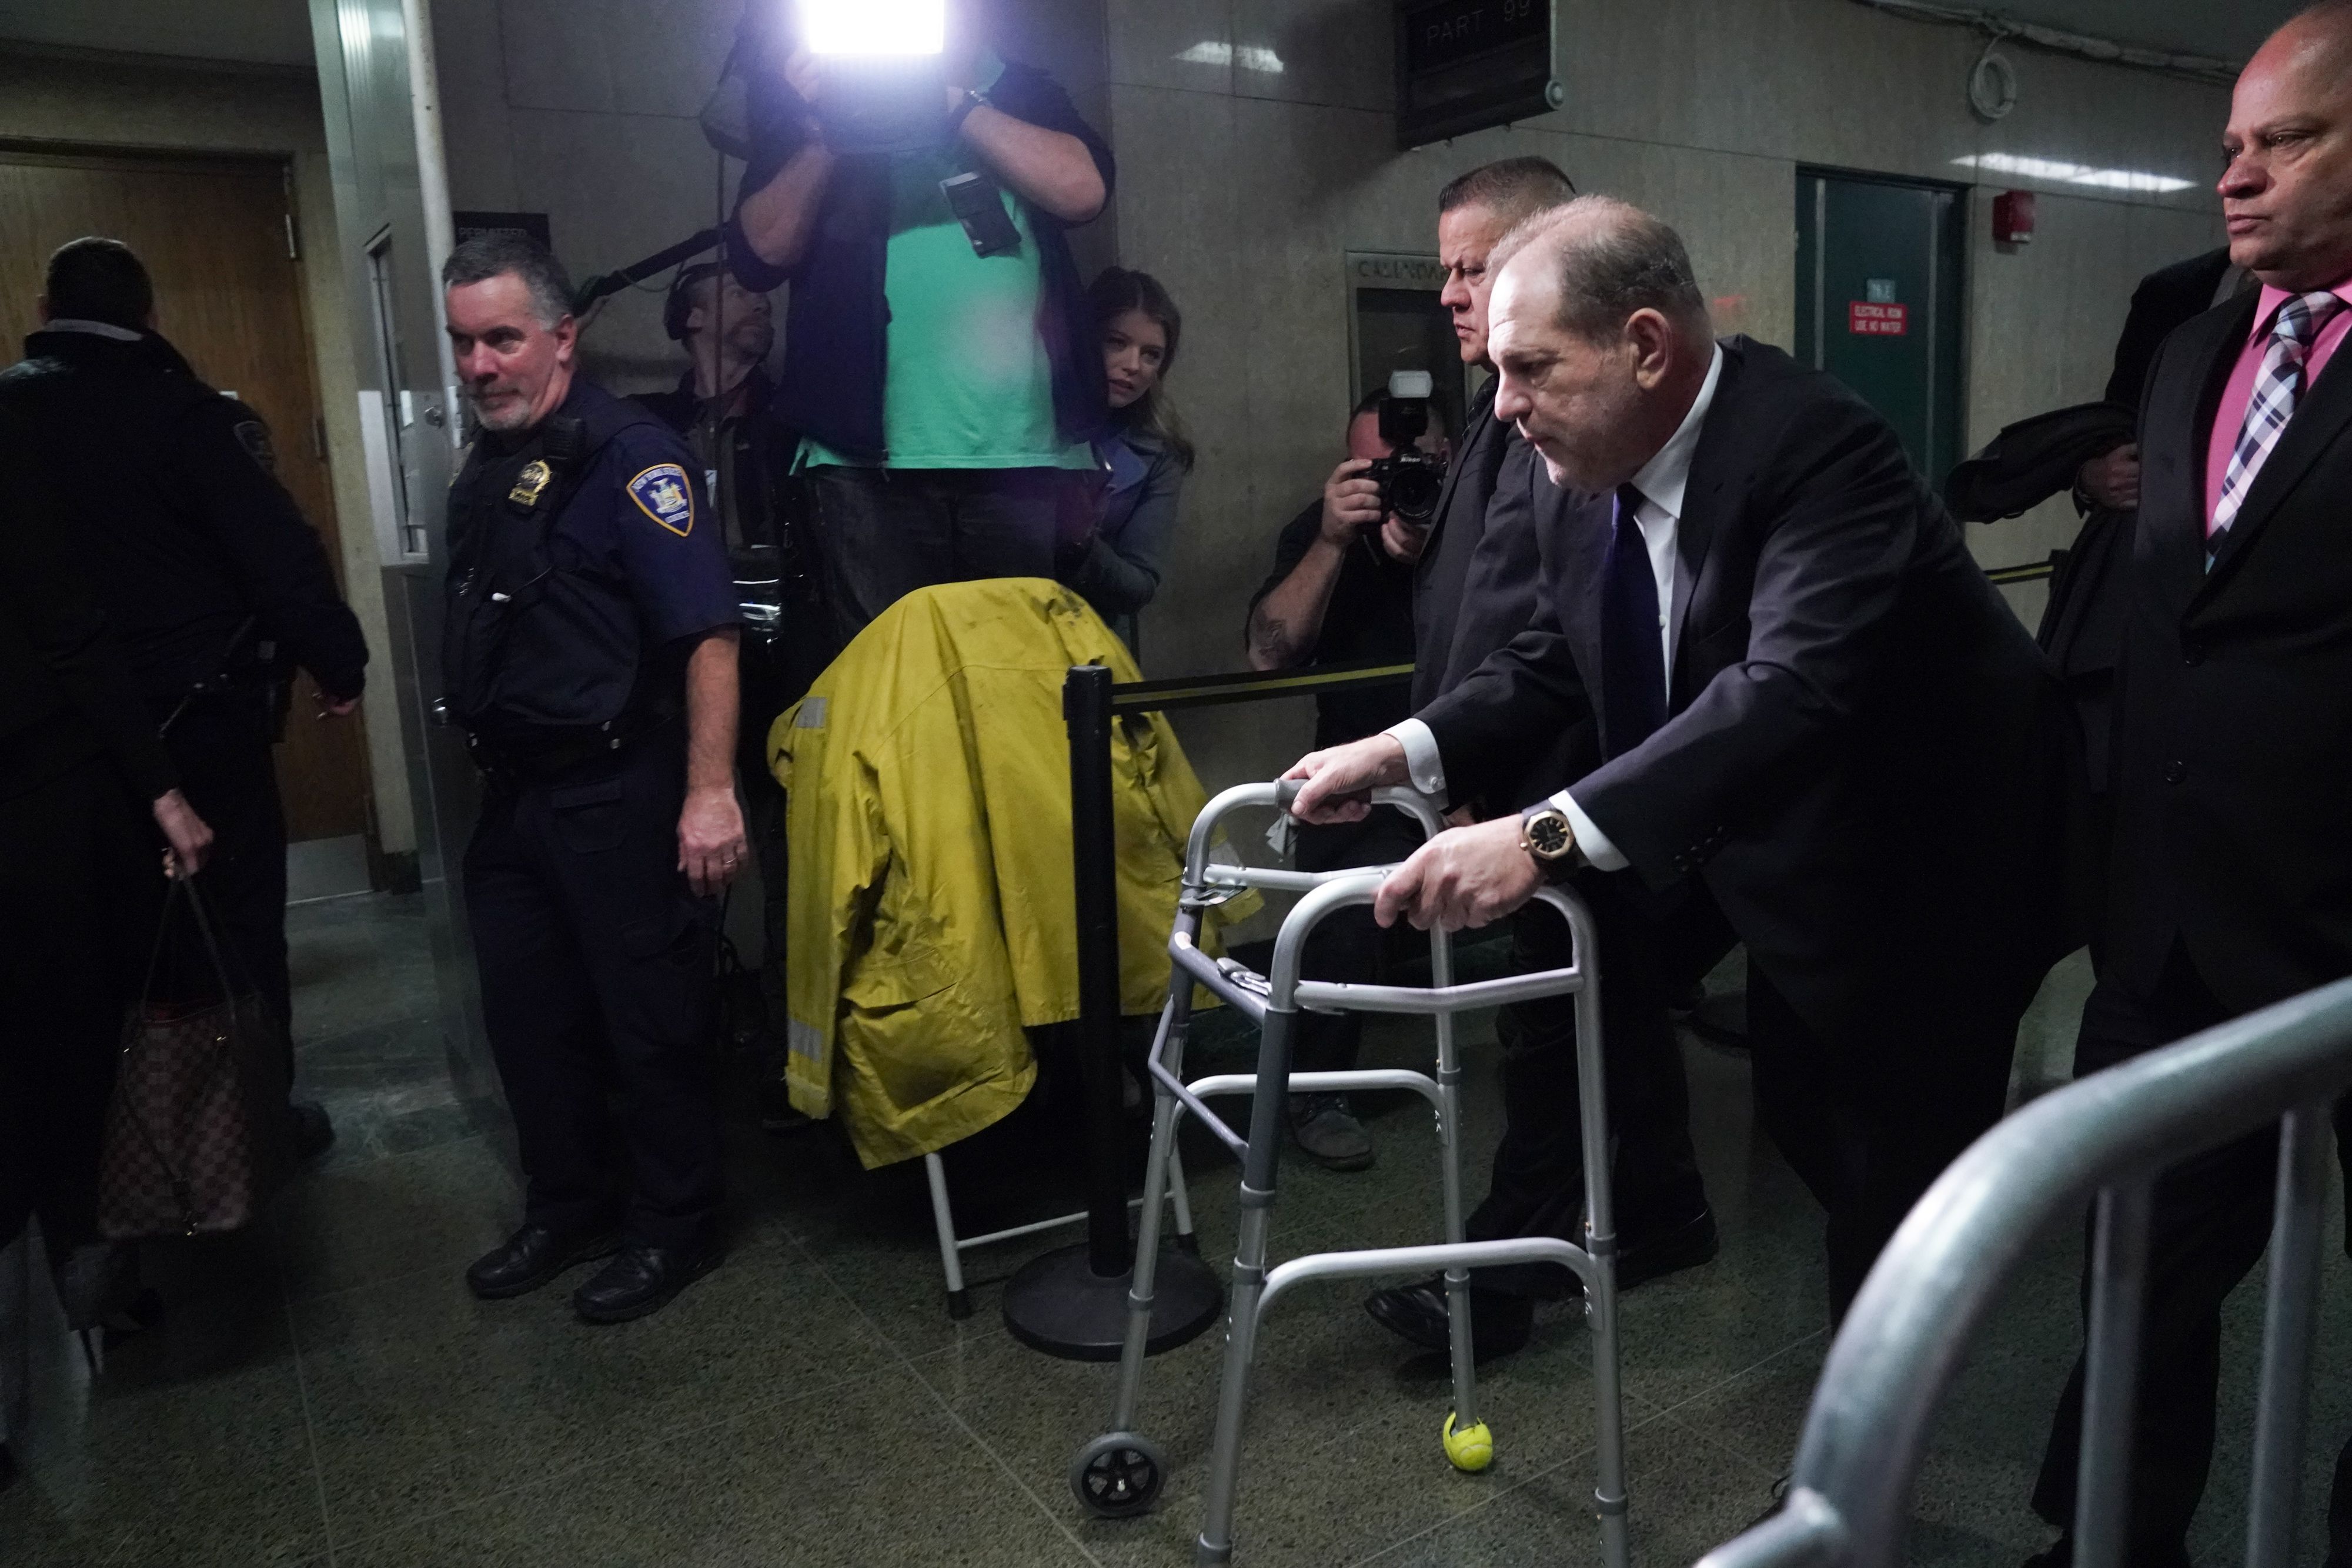 Harvey Weinstein leaves Manhattan Criminal Court, using a walker, following a hearing on December 11, 2019 in New York. (AFP via Getty Images)